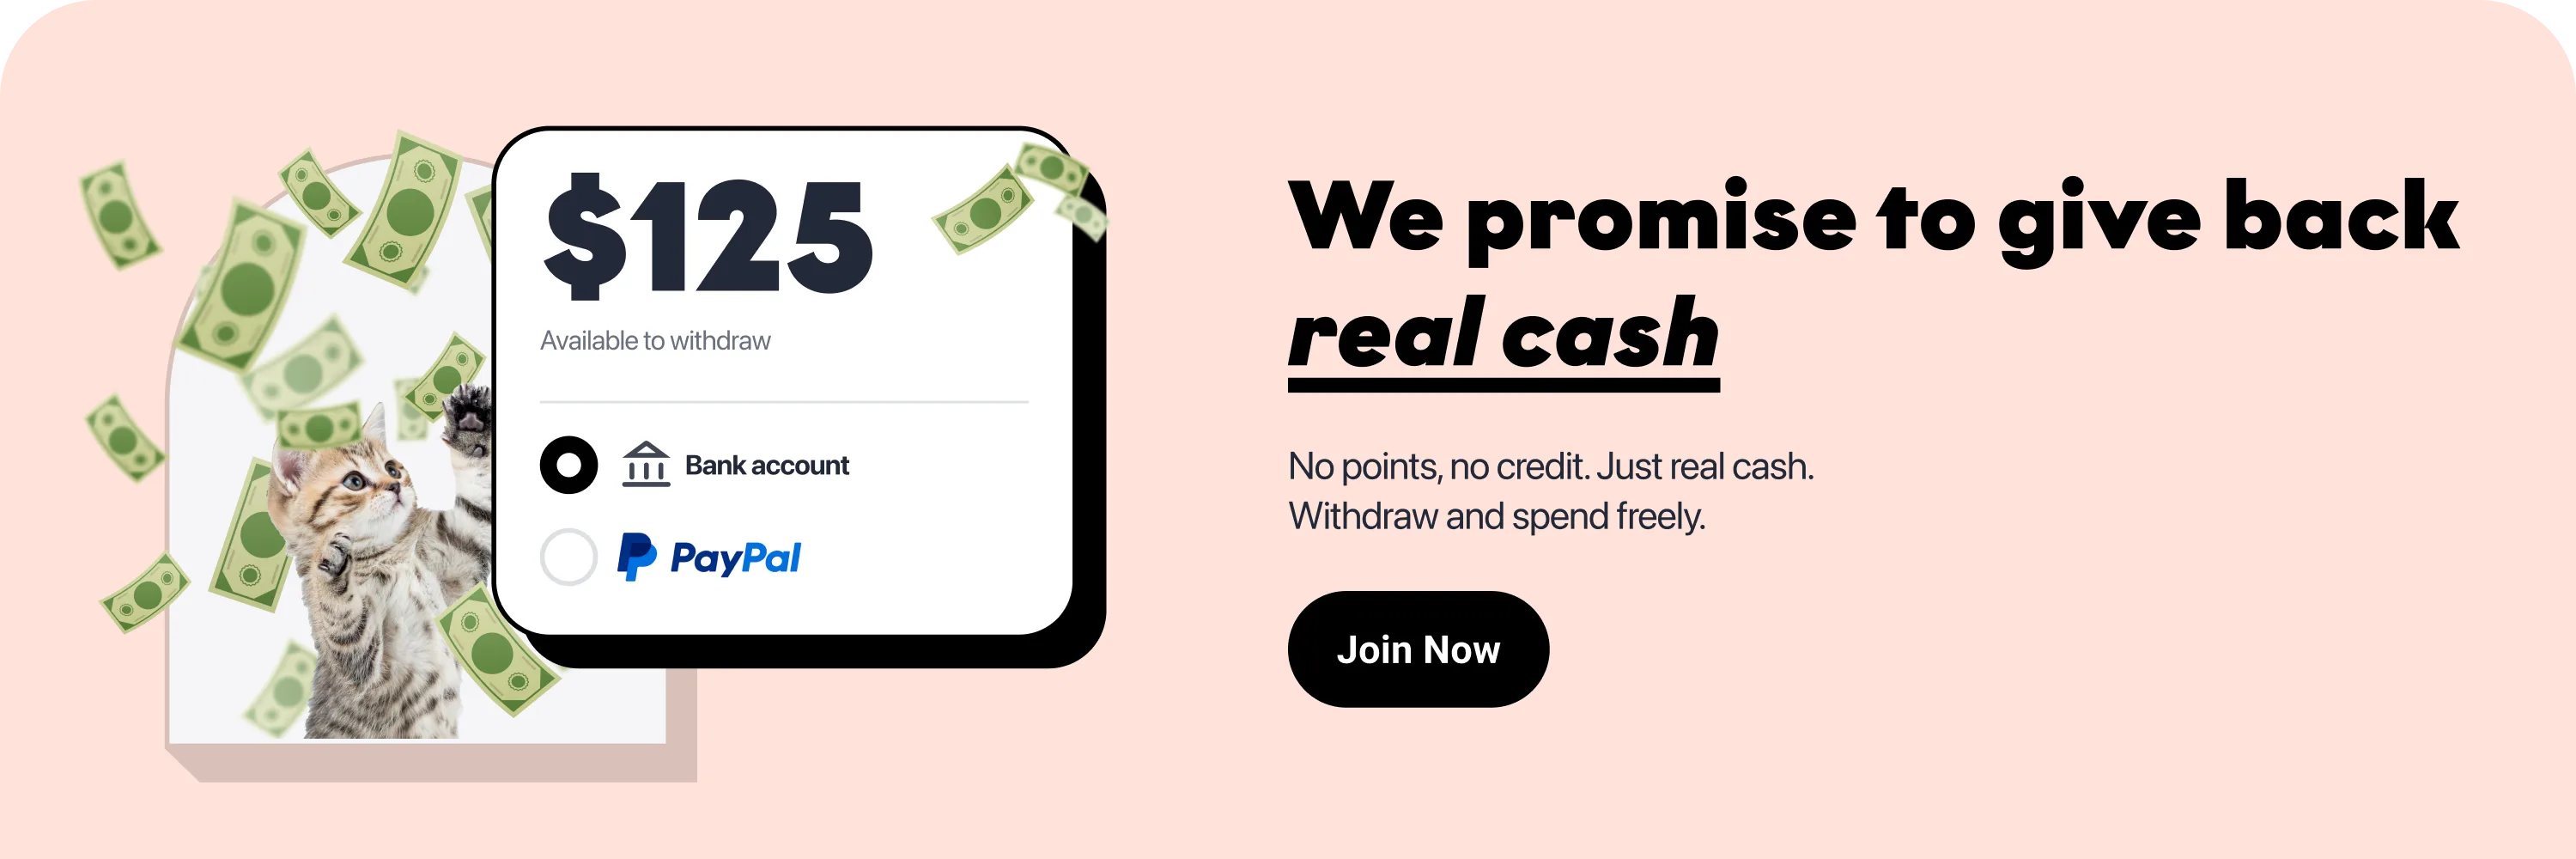 ShopBack gives you real cash. Withdraw and spend freely.